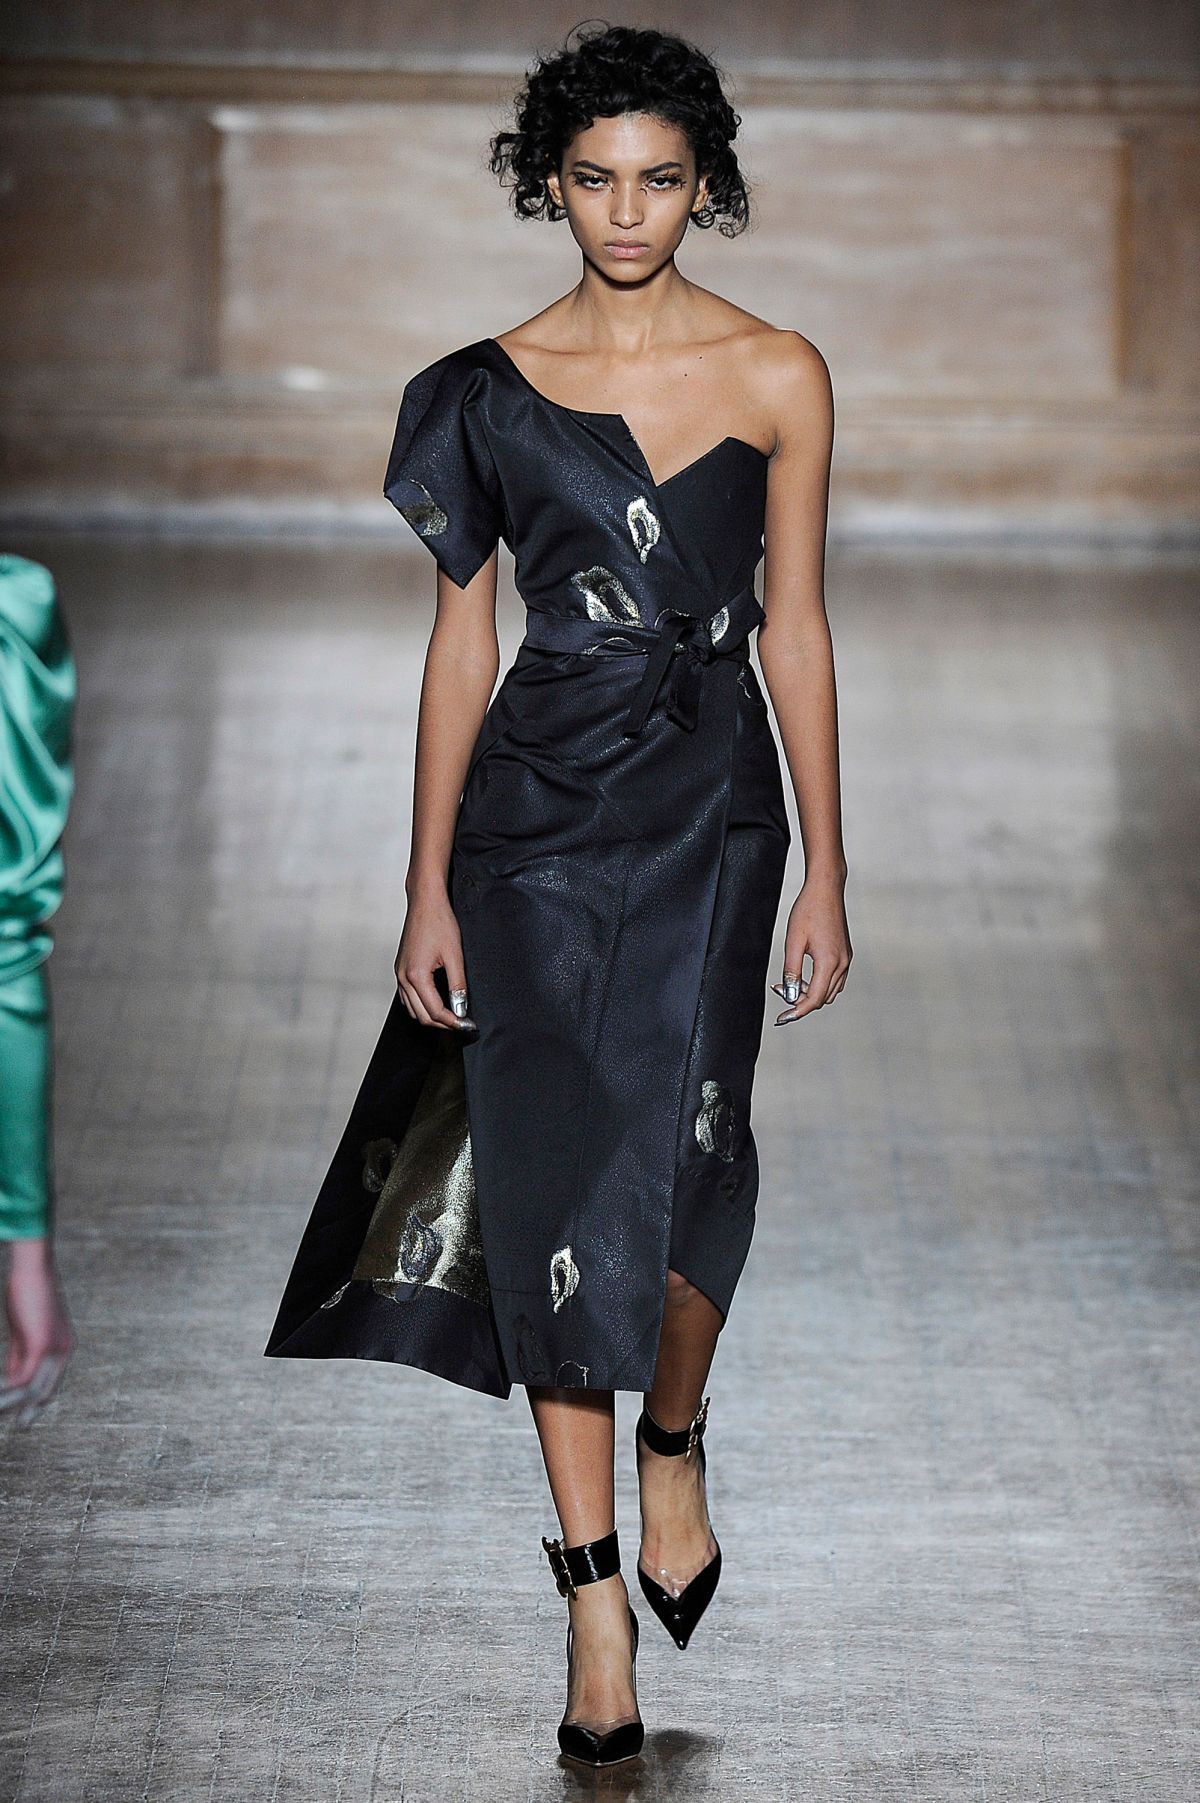 London Fashion Week Throws A Pattern Party With Romantic Style | The ...